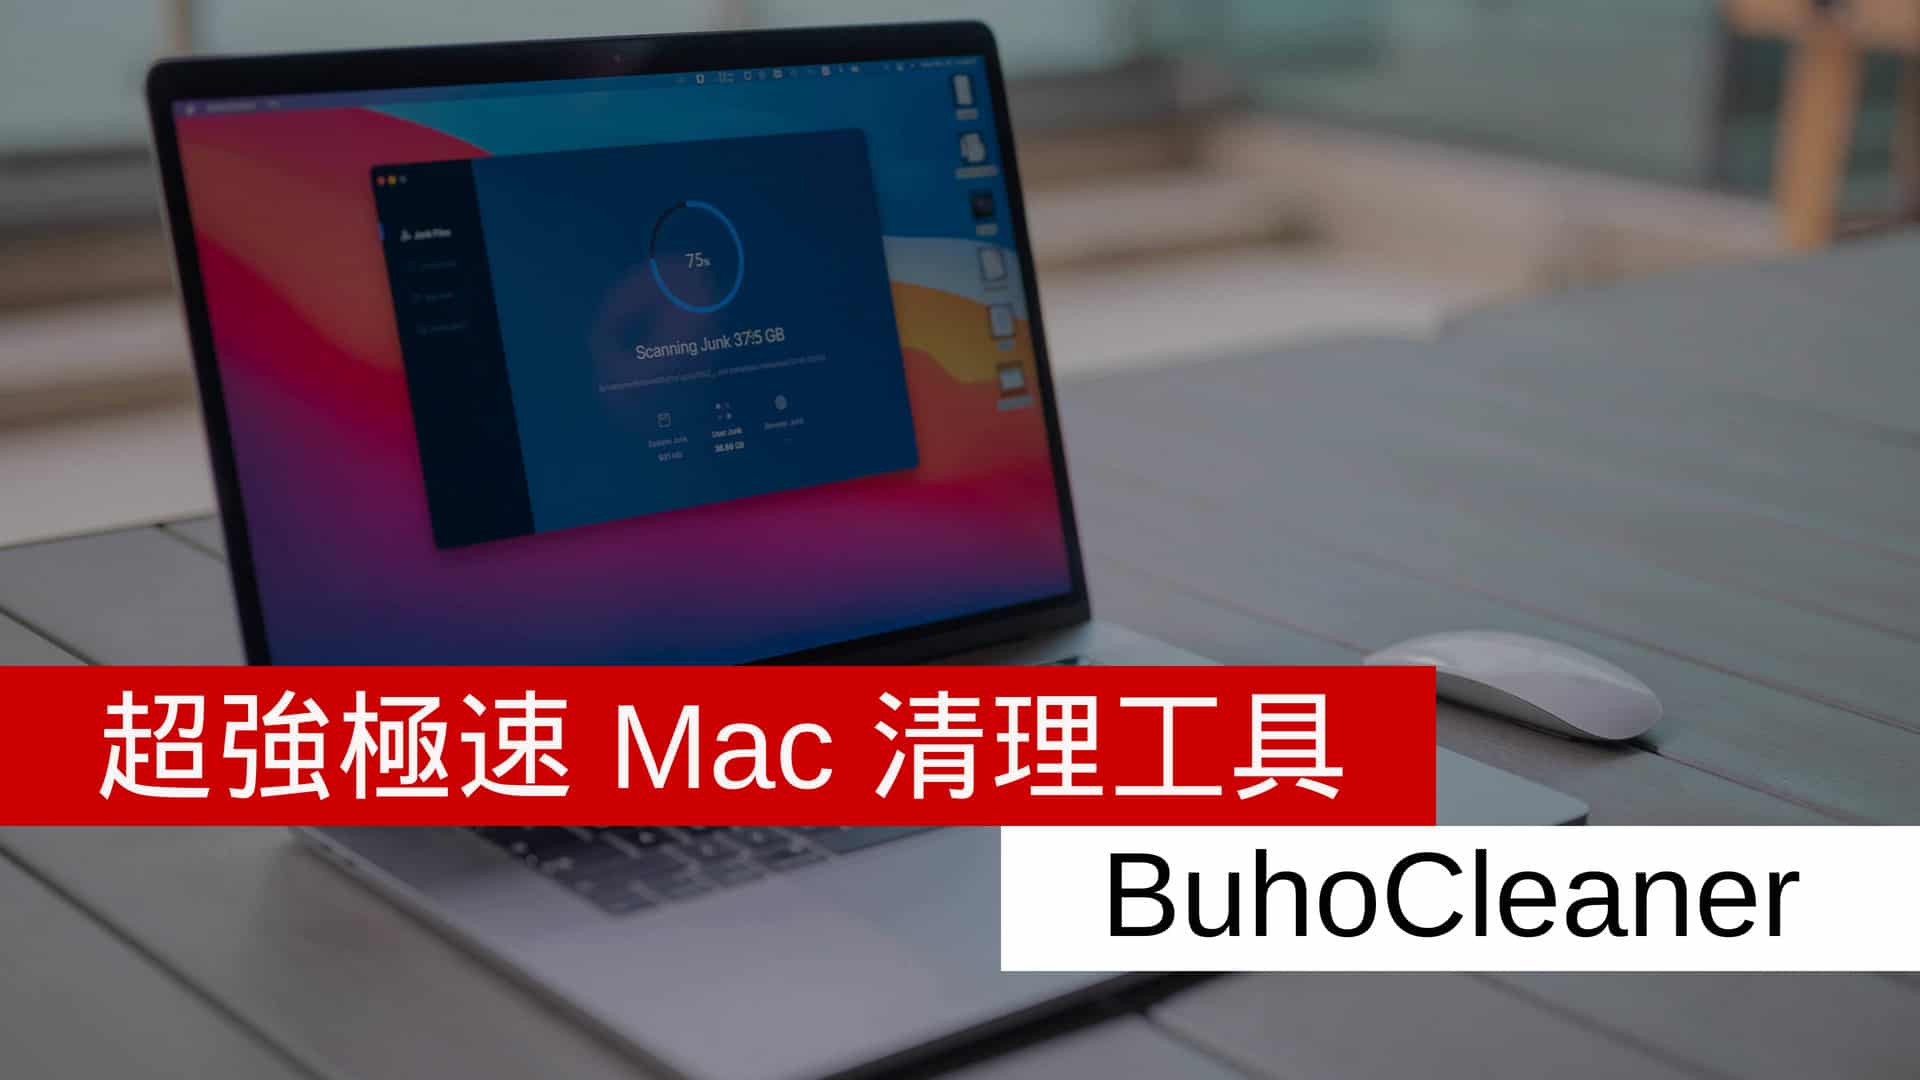 download the new for mac BuhoCleaner